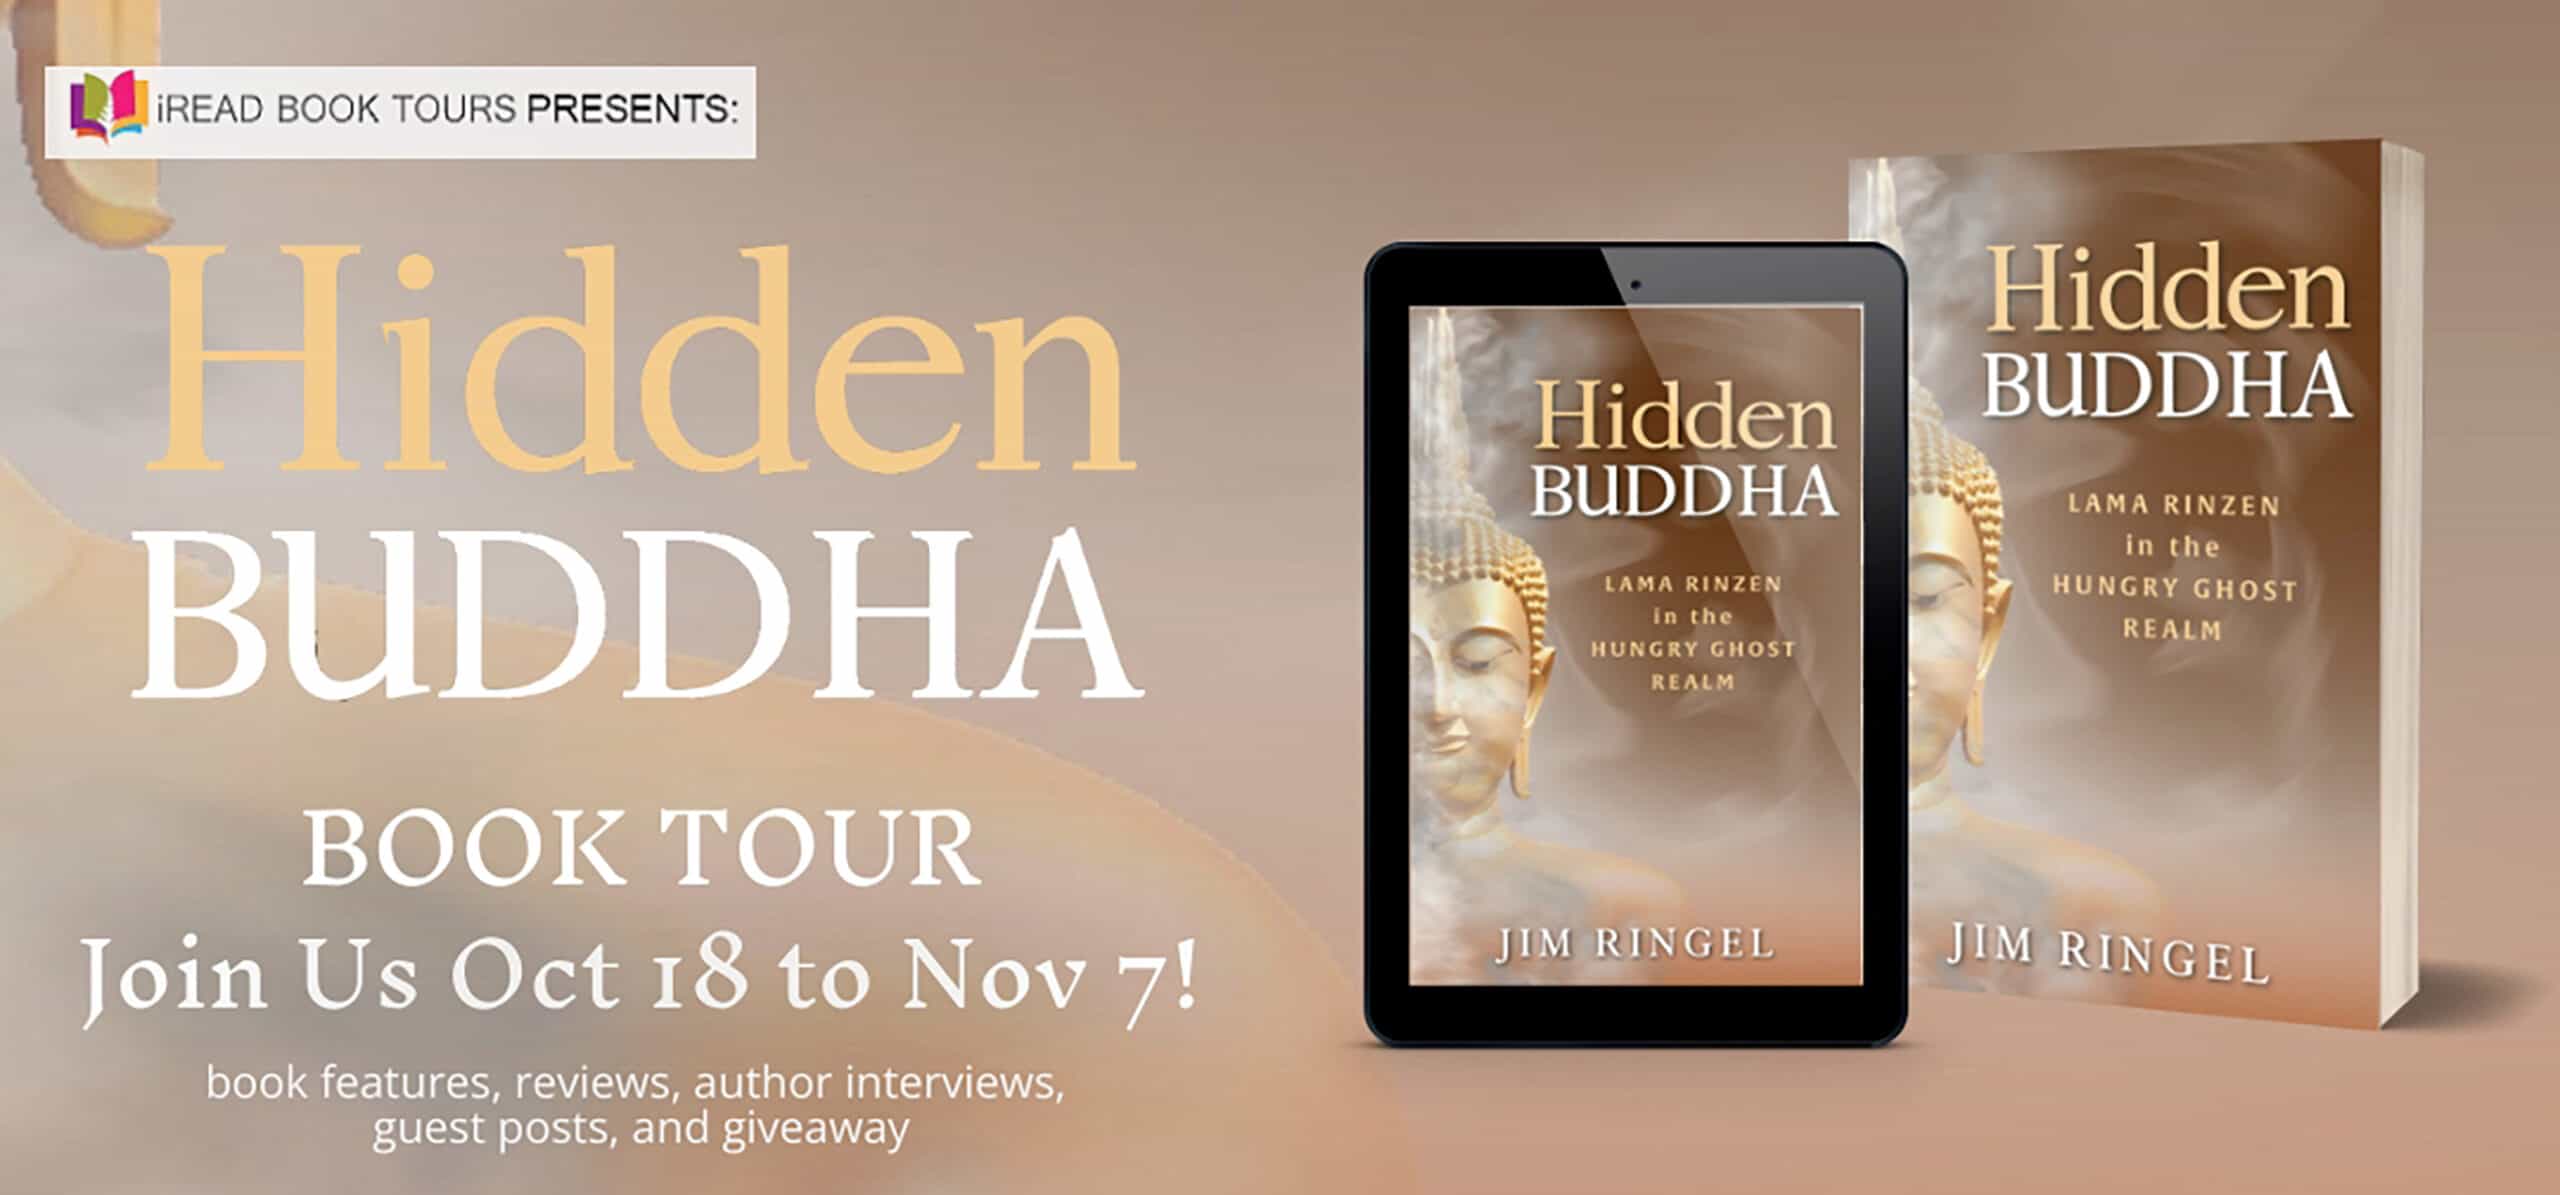 Hidden Buddha: Lama Rinzen in the Hungry Ghost Realm by Jim Ringel (Lama Rinzen Mysteries #2) | Author Guest Post, Spotlight, Giveaway 